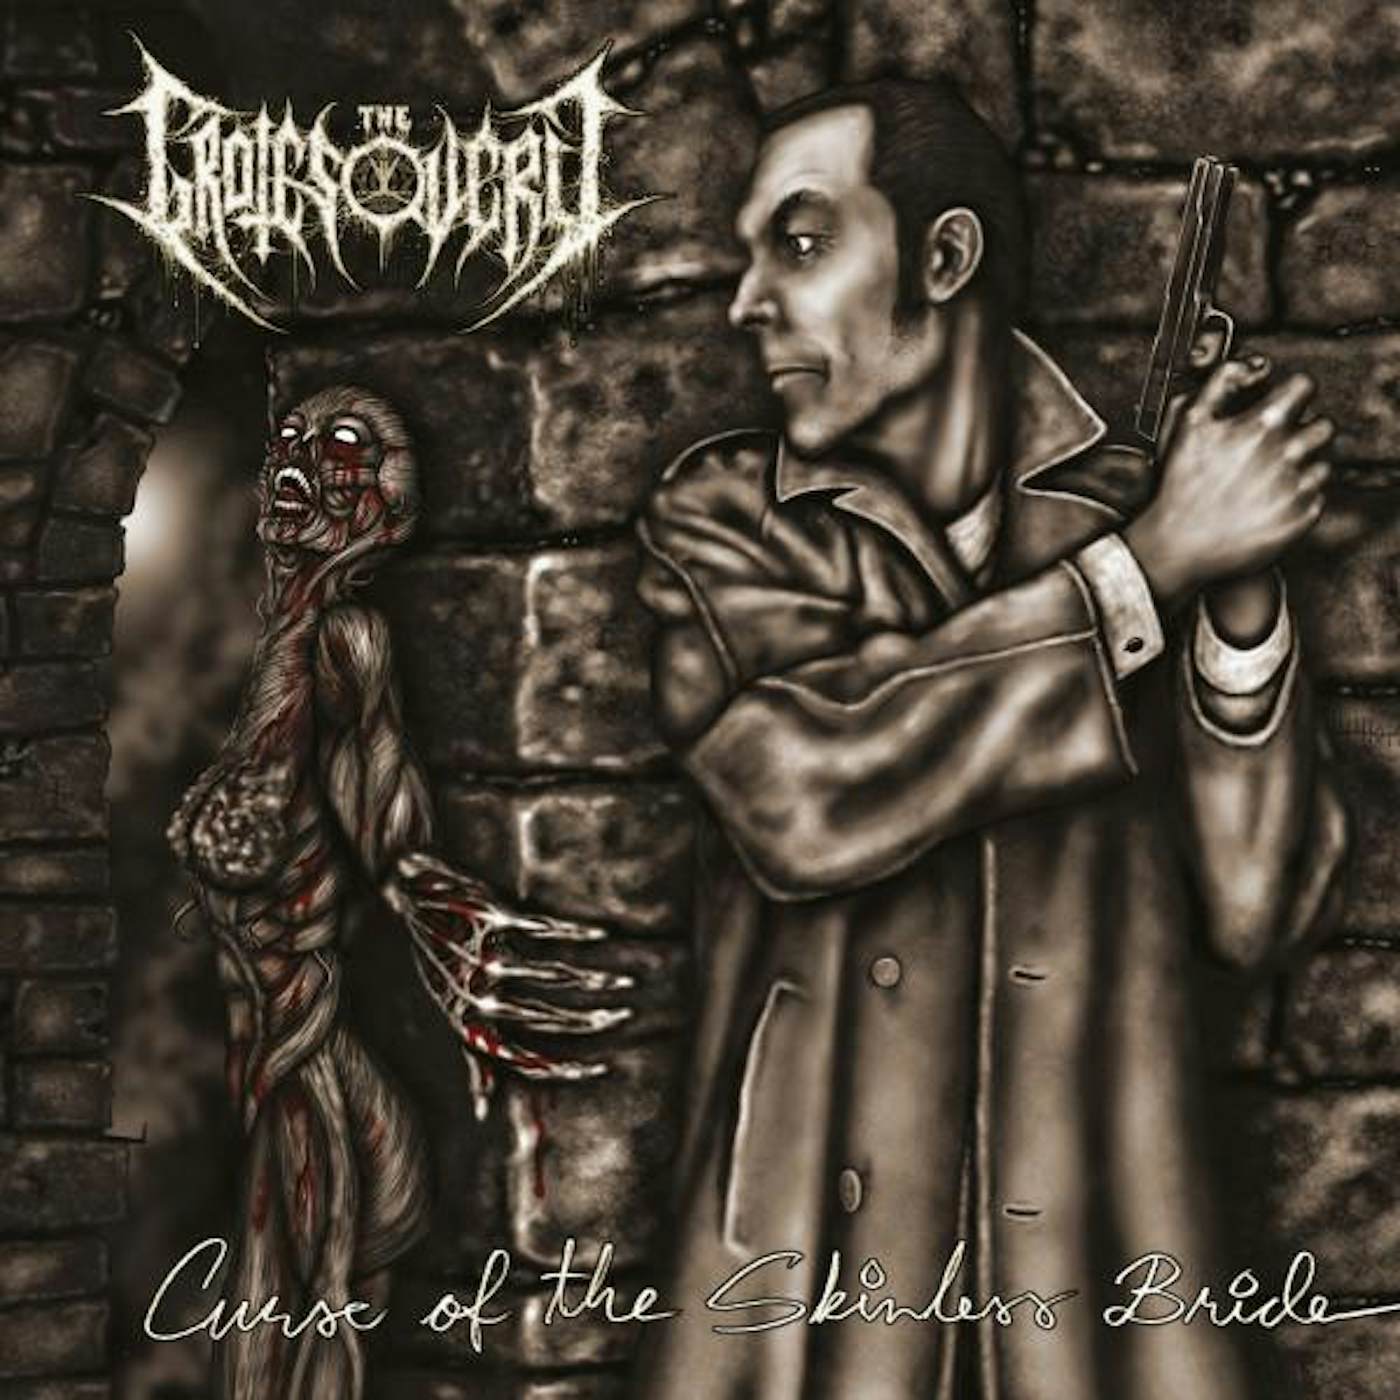 The Grotesquery Curse of the Skinless Bride Vinyl Record